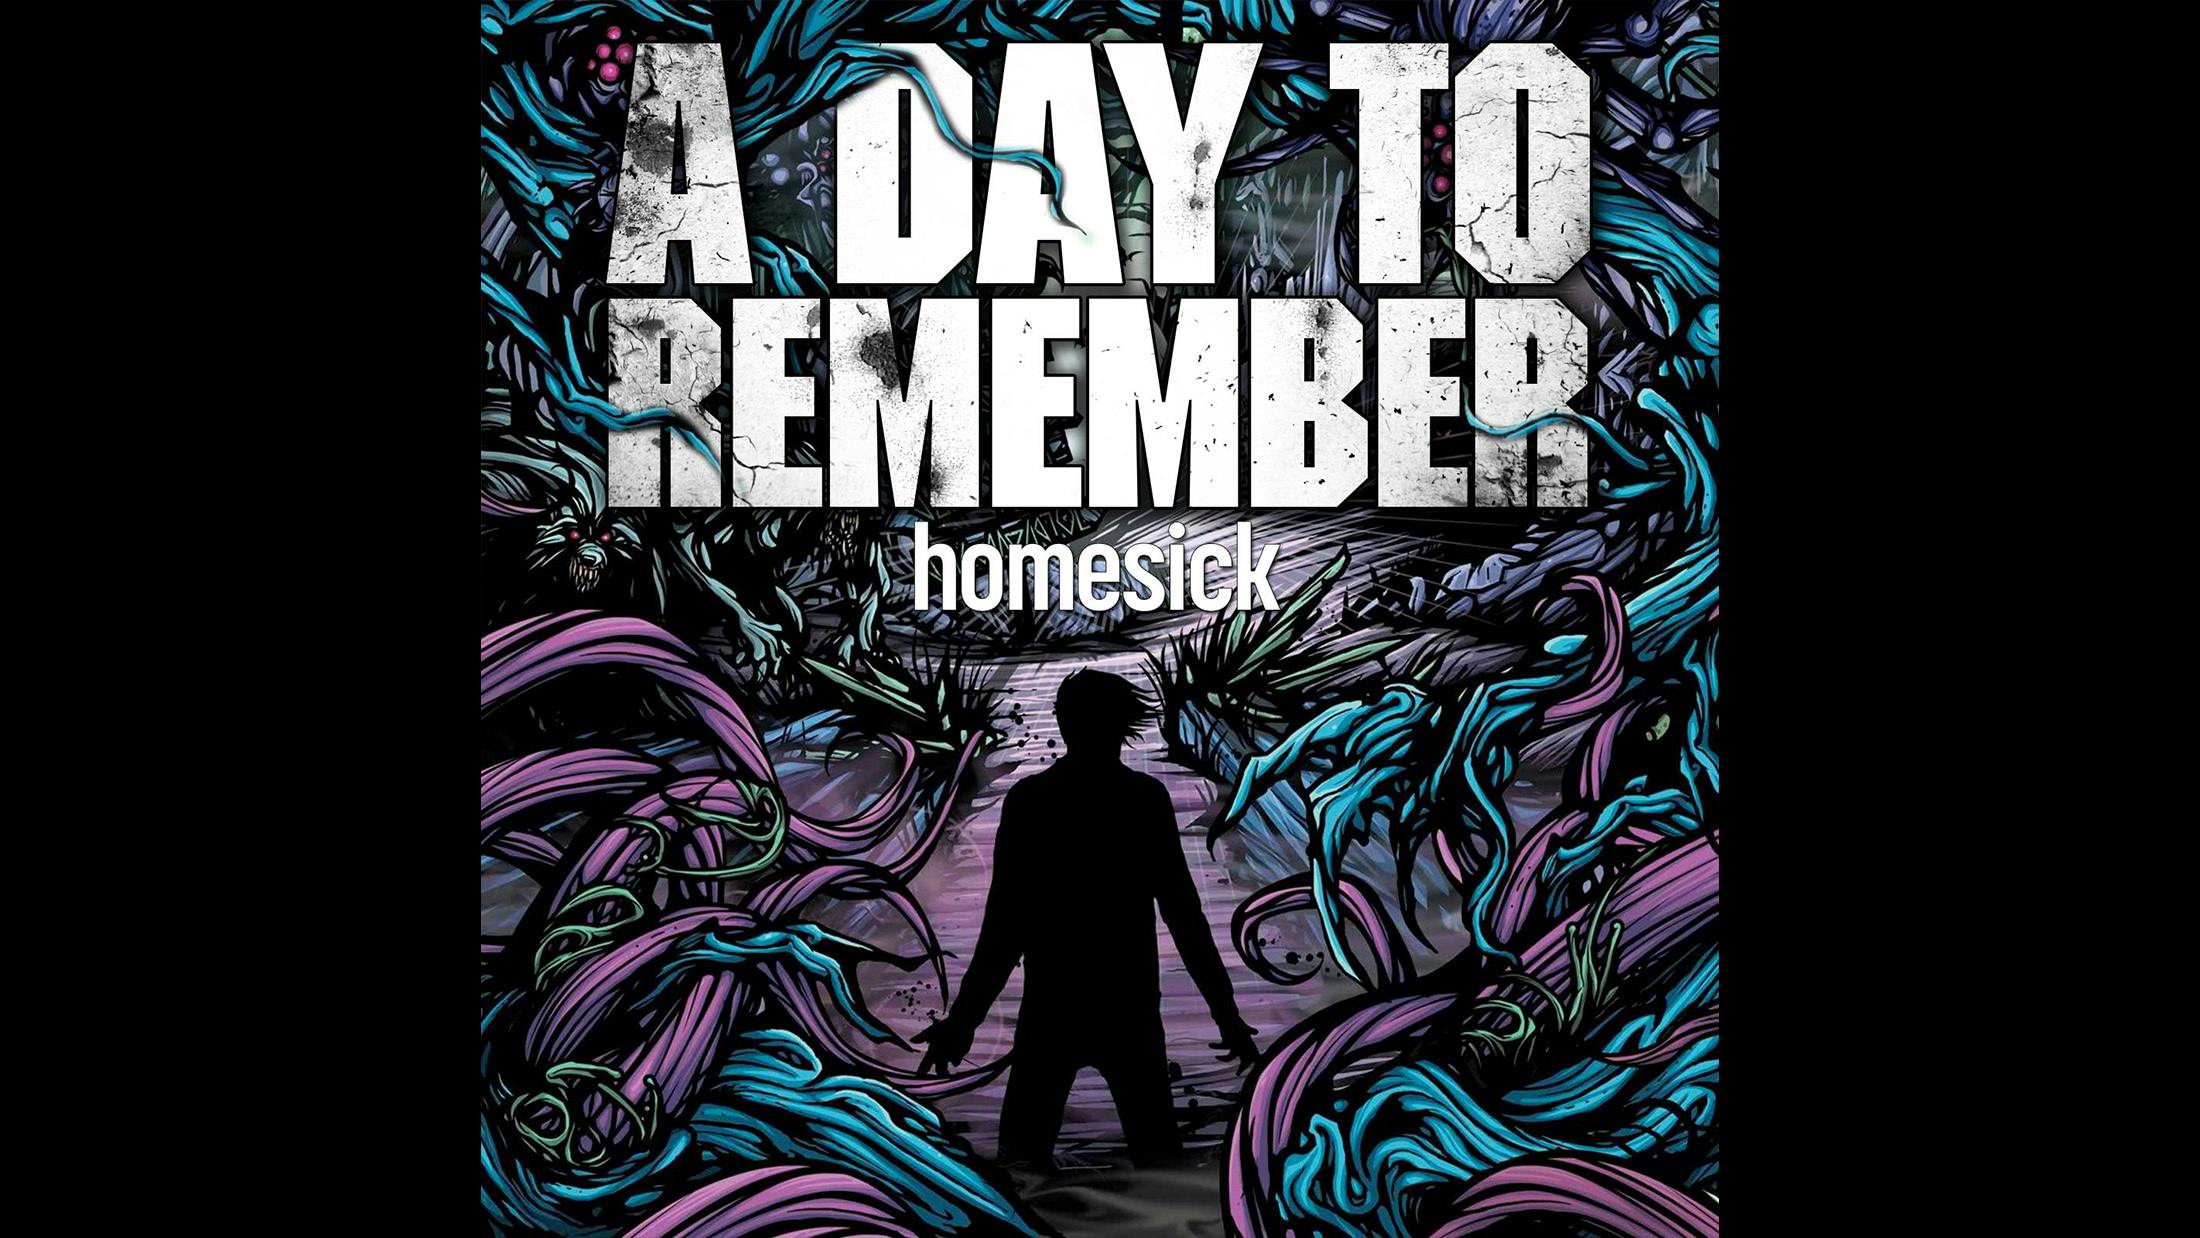 February 2, 2009, was the day we first heard ADTR nail the sound that made them massive: heavy pop-punk. Homesick’s success is part down to producer Chad Gilbert, who helped the quintet achieve New Found Glory-levels of catchy, but mainly due to Jeremy McKinnon, who’s as at home roaring over a breakdown as he is belting out a heartfelt ballad. It’s pop-punk, but not as we knew it.